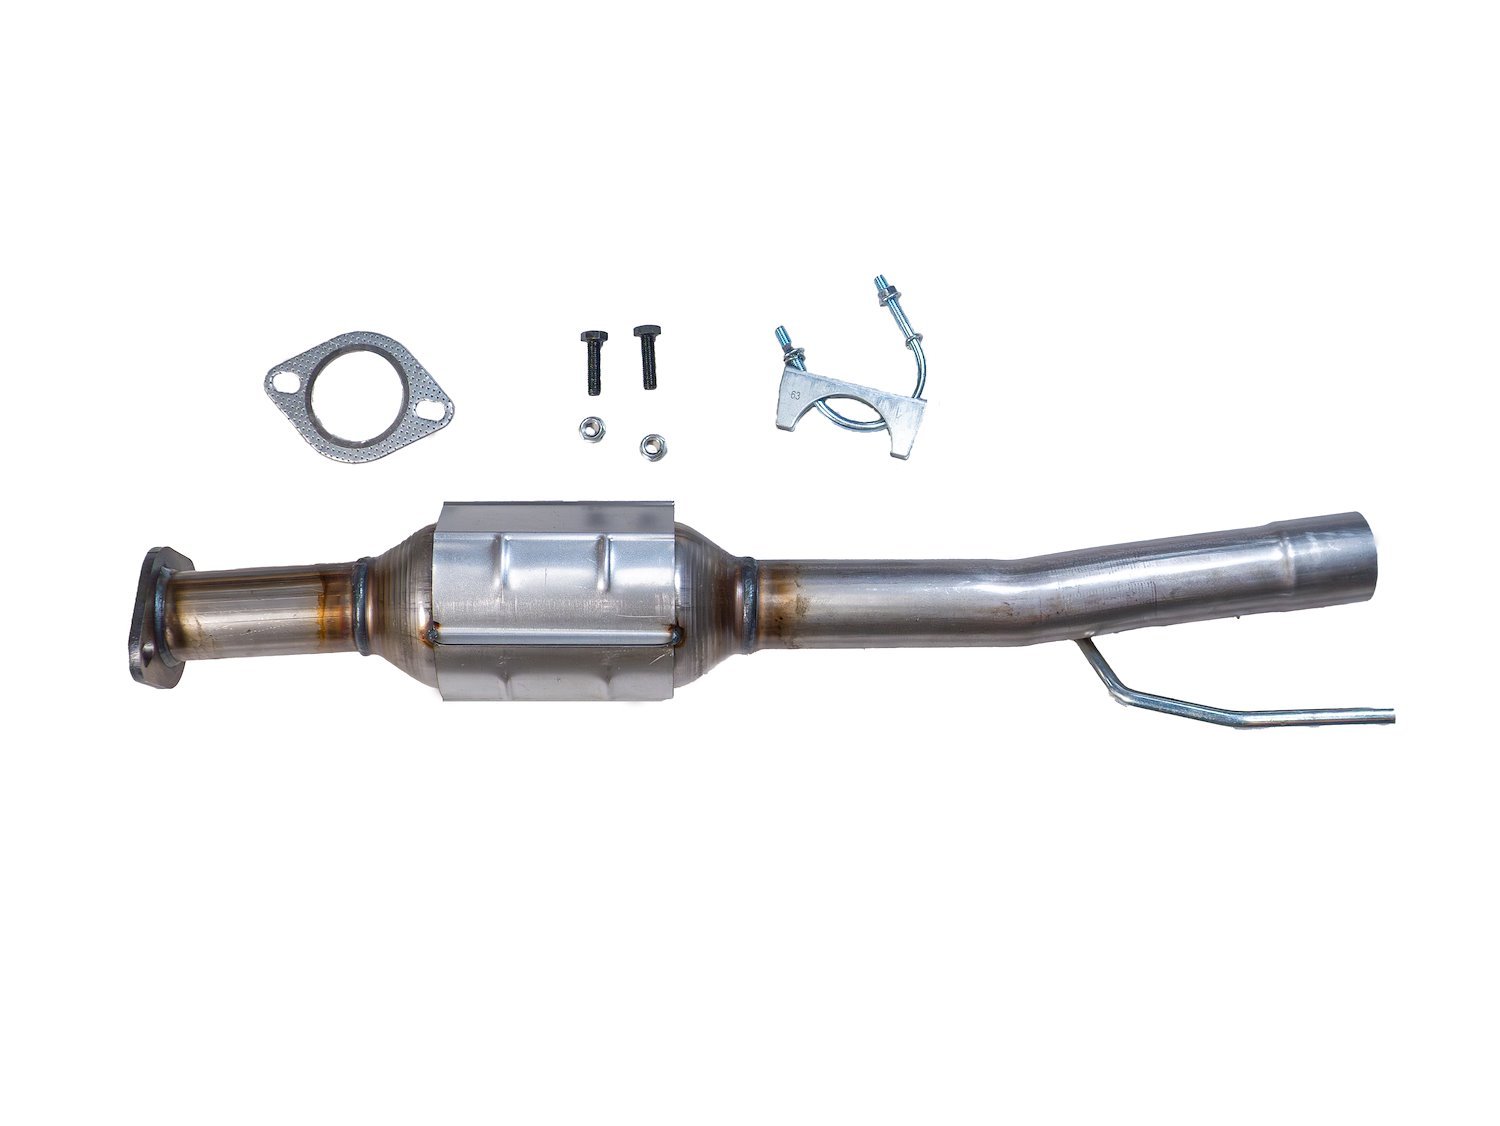 Catalytic Converter Fits 2005-2008 Ford Escape, Mazda Tribute, Mercury Mariner w/2.3L 4 cyl., 3.0L V6 Eng. [Rear]